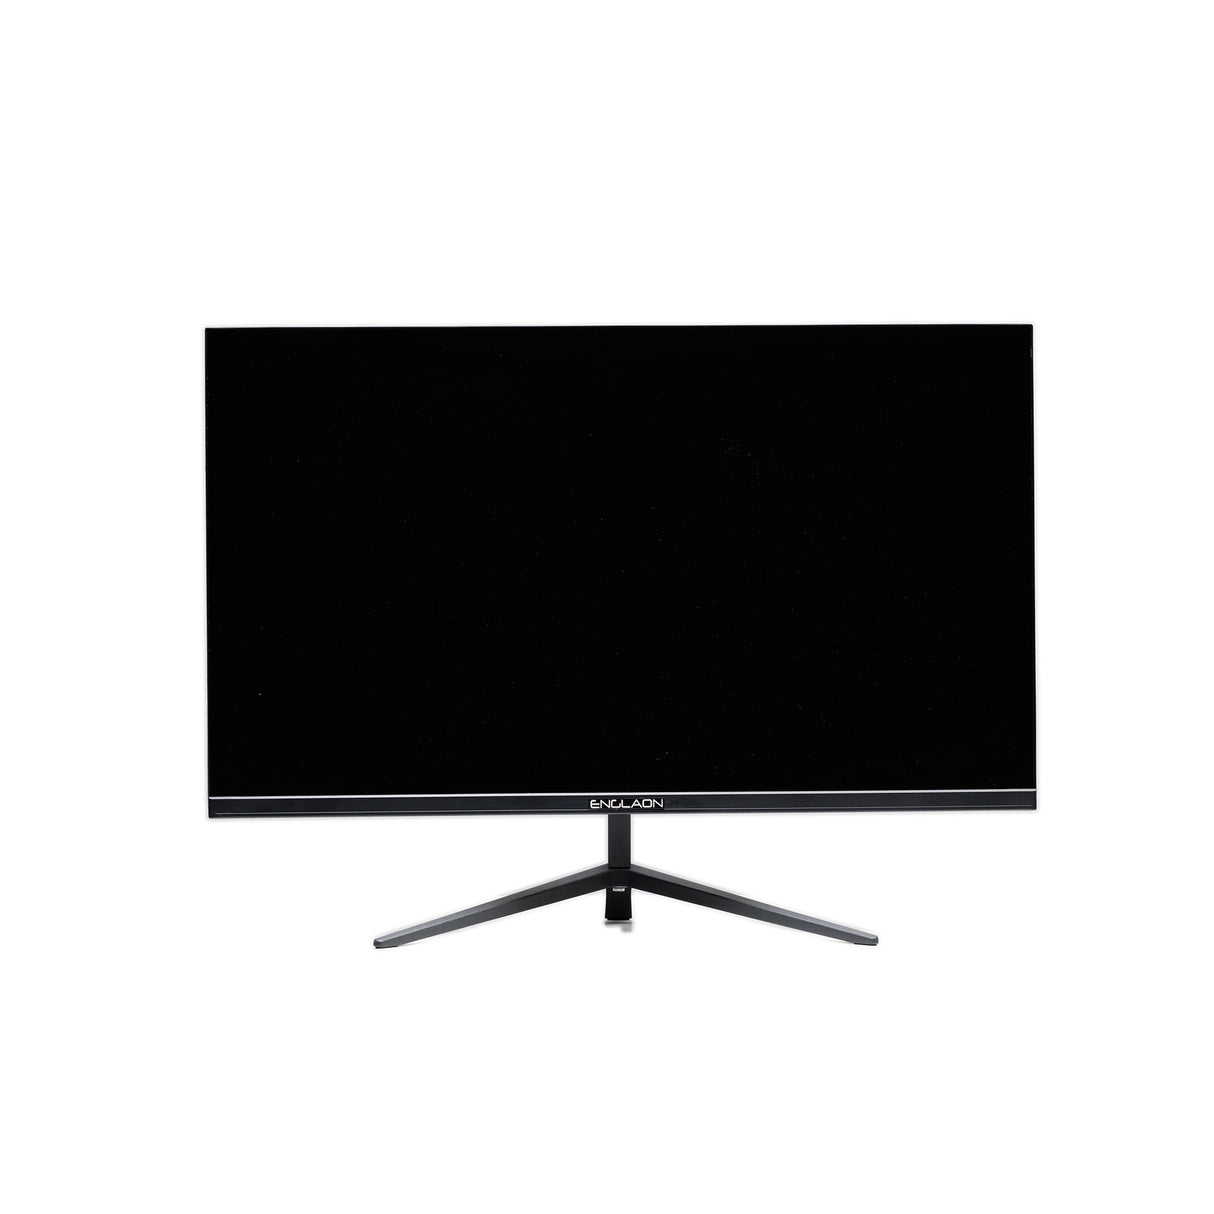 ENGLAON 27” Full HD Frameless 12V Smart Monitor With Android 11